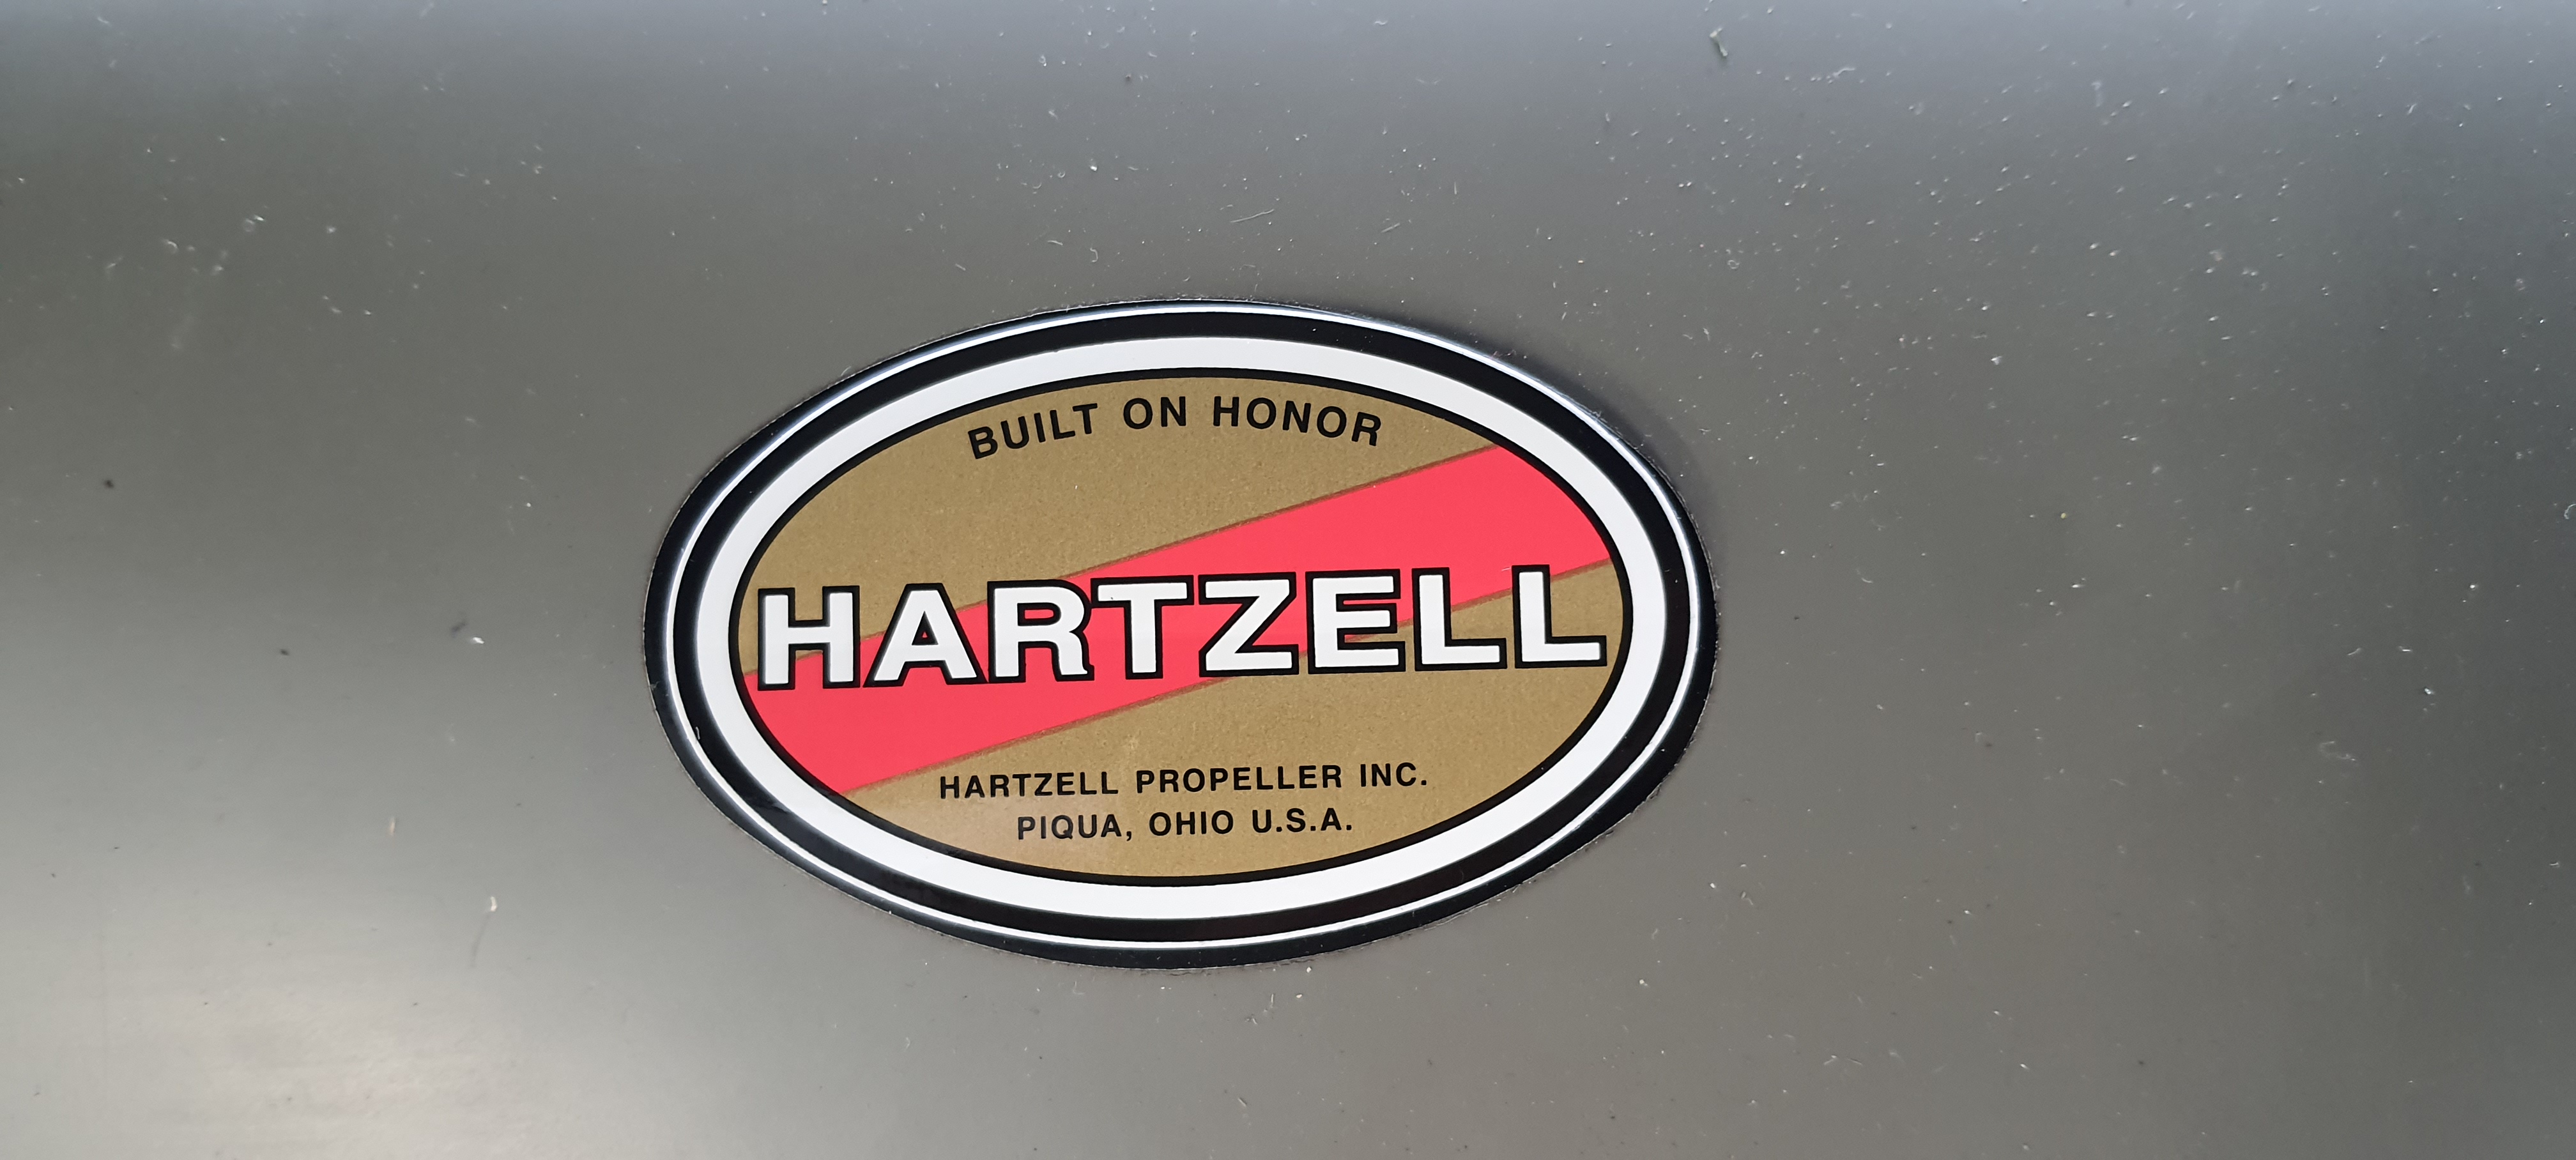 Logo of Hartzell propeller manufacturer - Airservices France